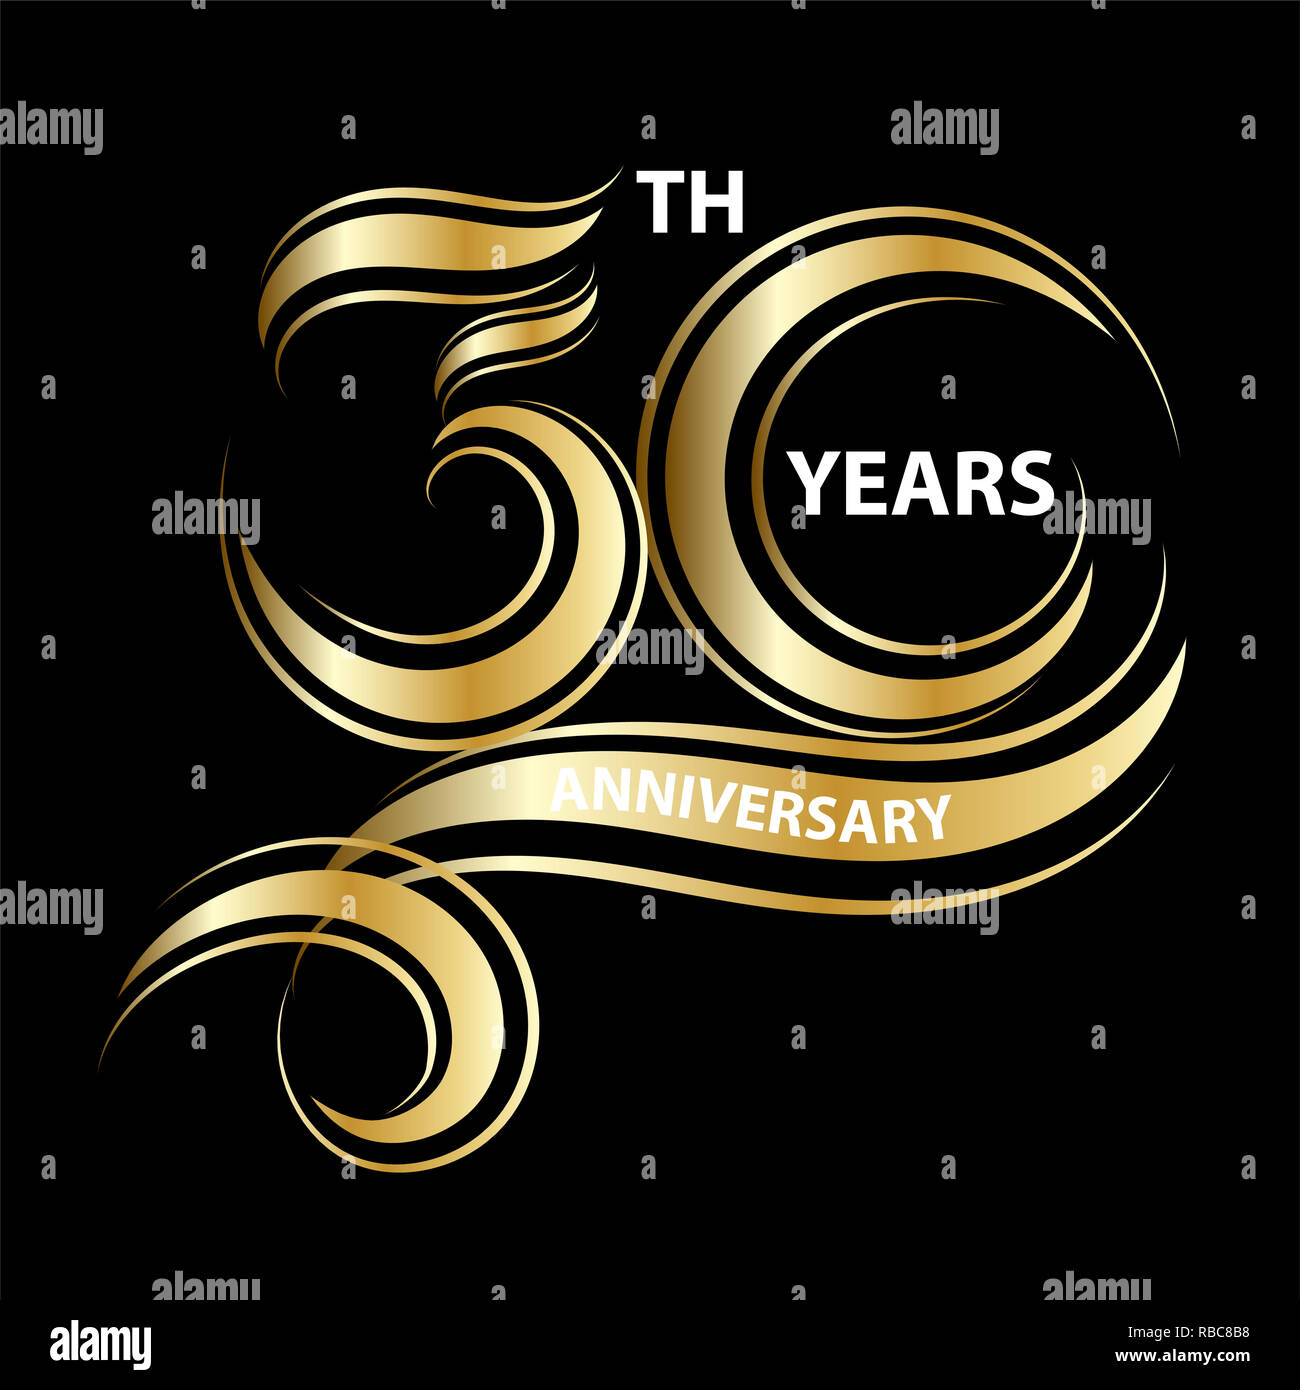 golden 30th anniversary sign and logo for gold celebration symbol Stock ...